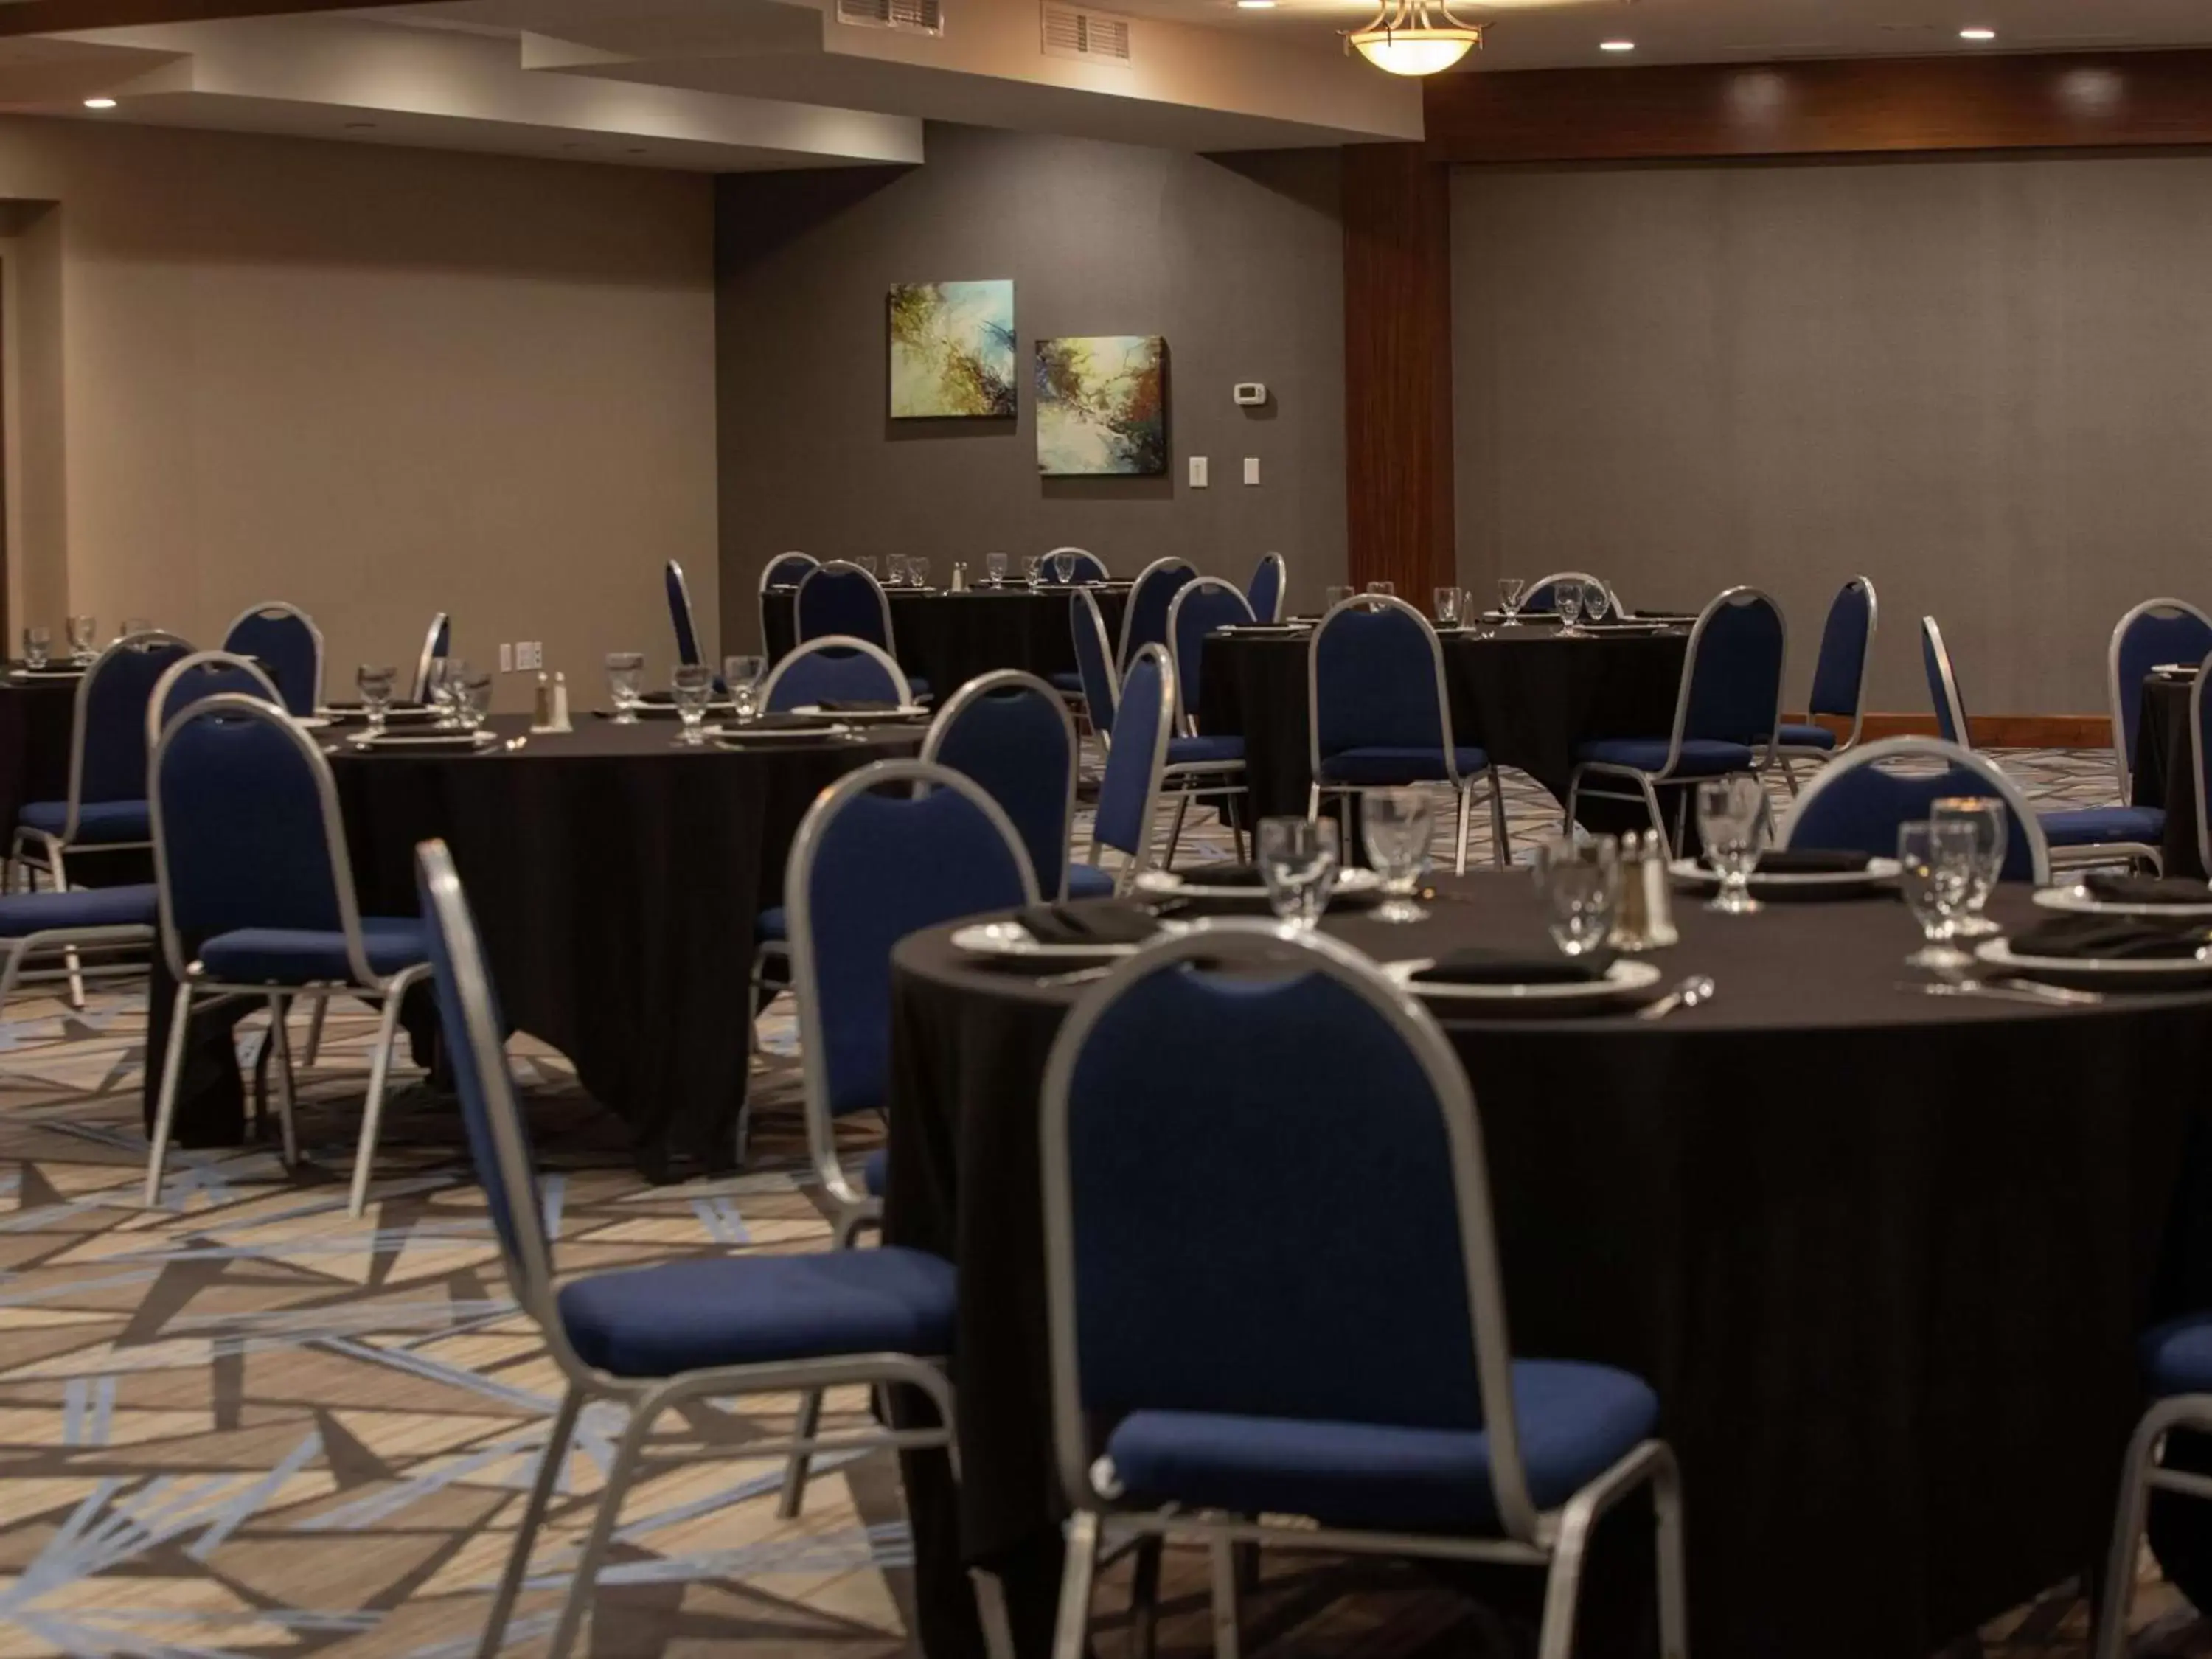 Meeting/conference room in Doubletree By Hilton Omaha Southwest, Ne